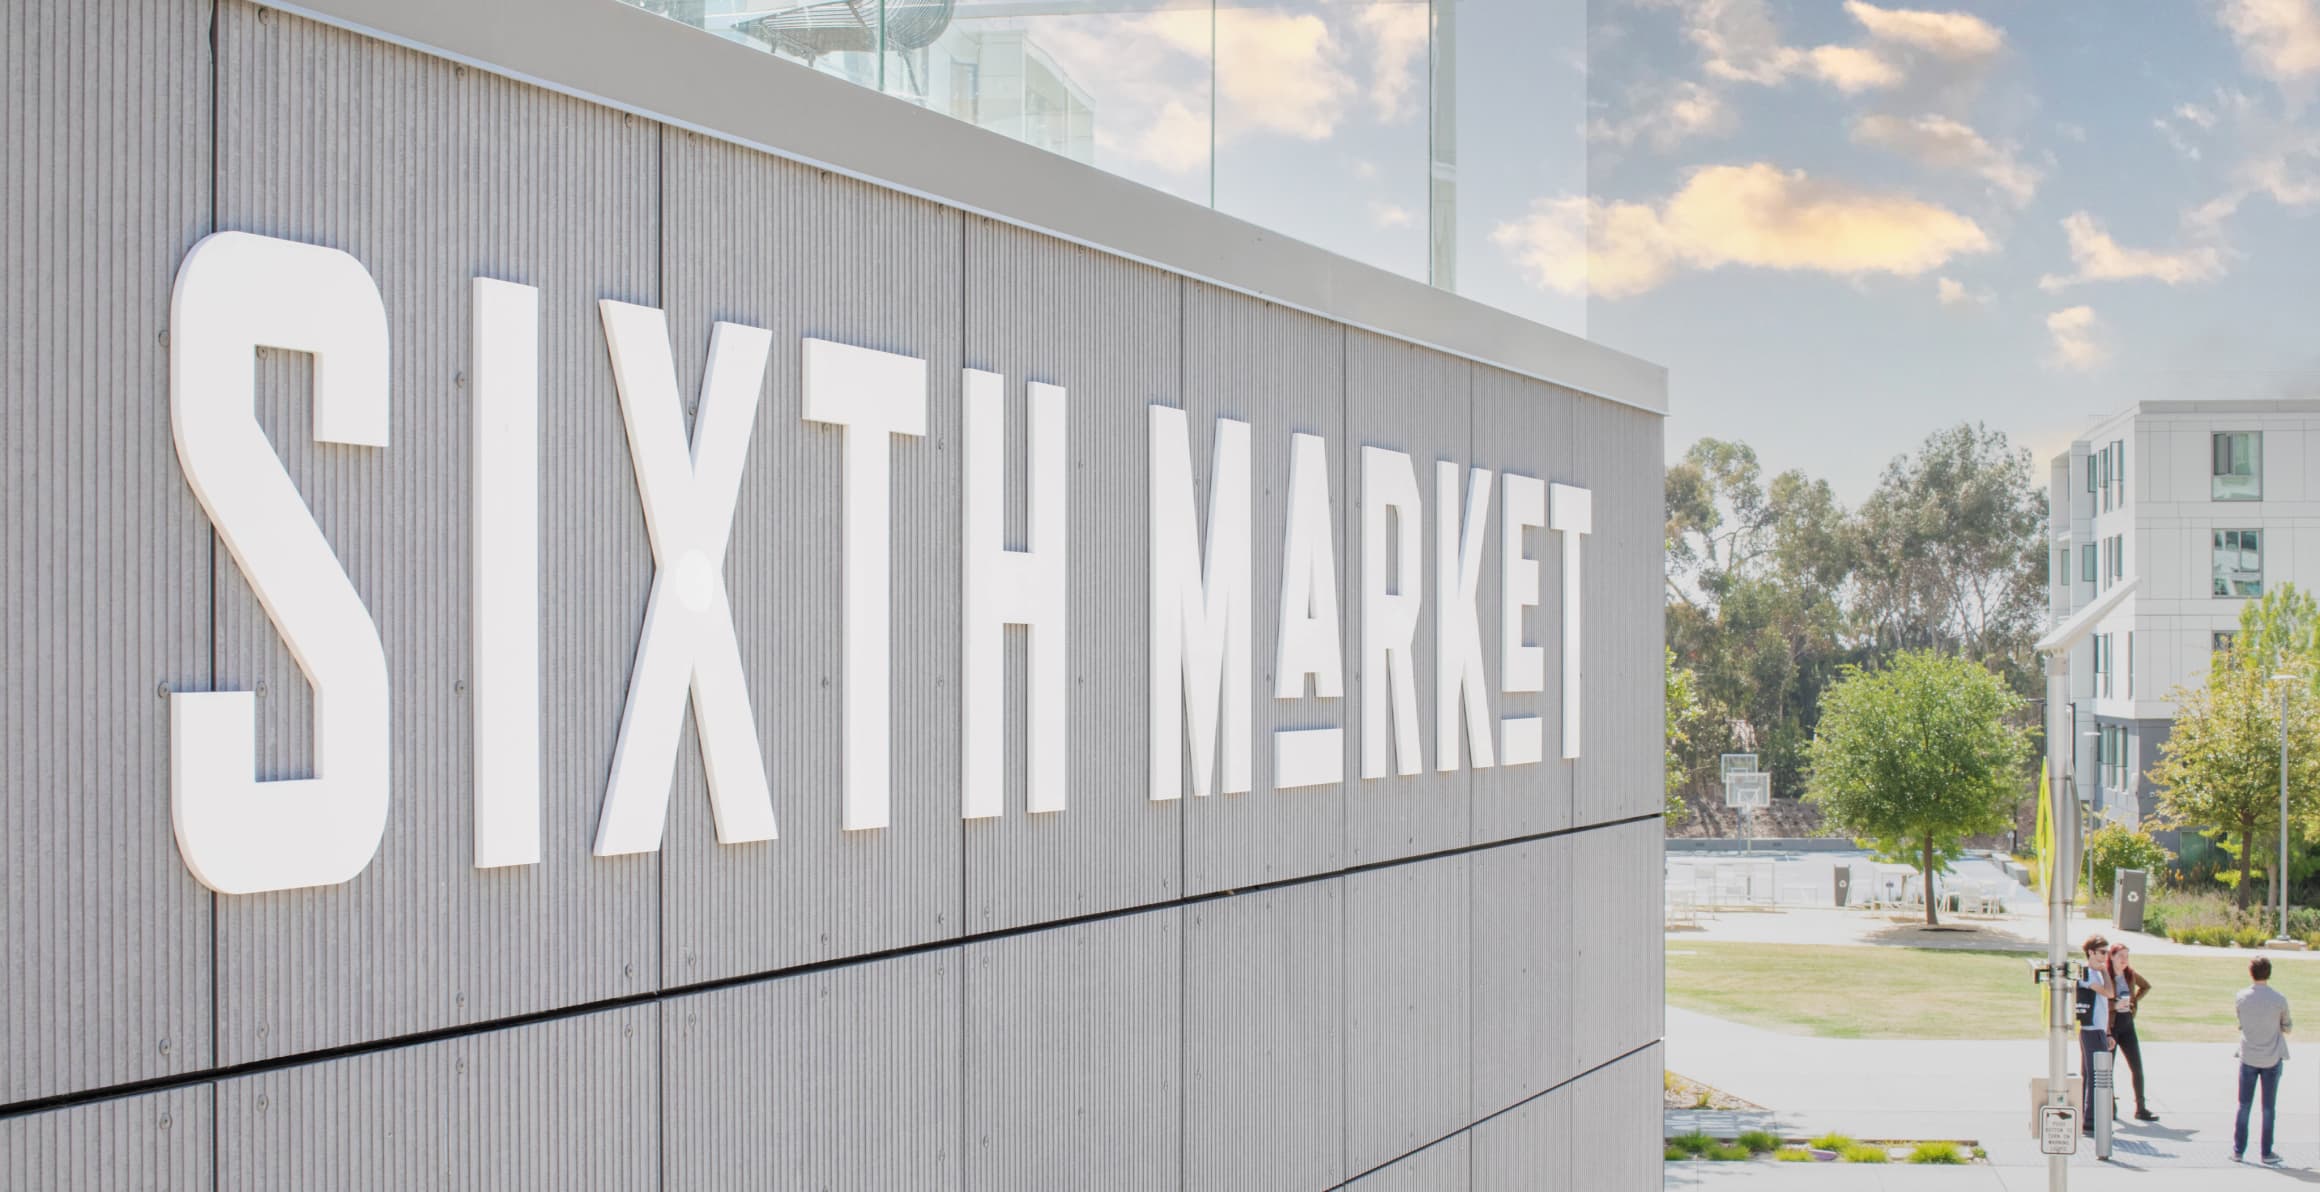 Detail of white "Sixth Market" dimensional letter project identity mounted to facade for UC San Diego Sixth Market by RSM Design in San Diego, California.